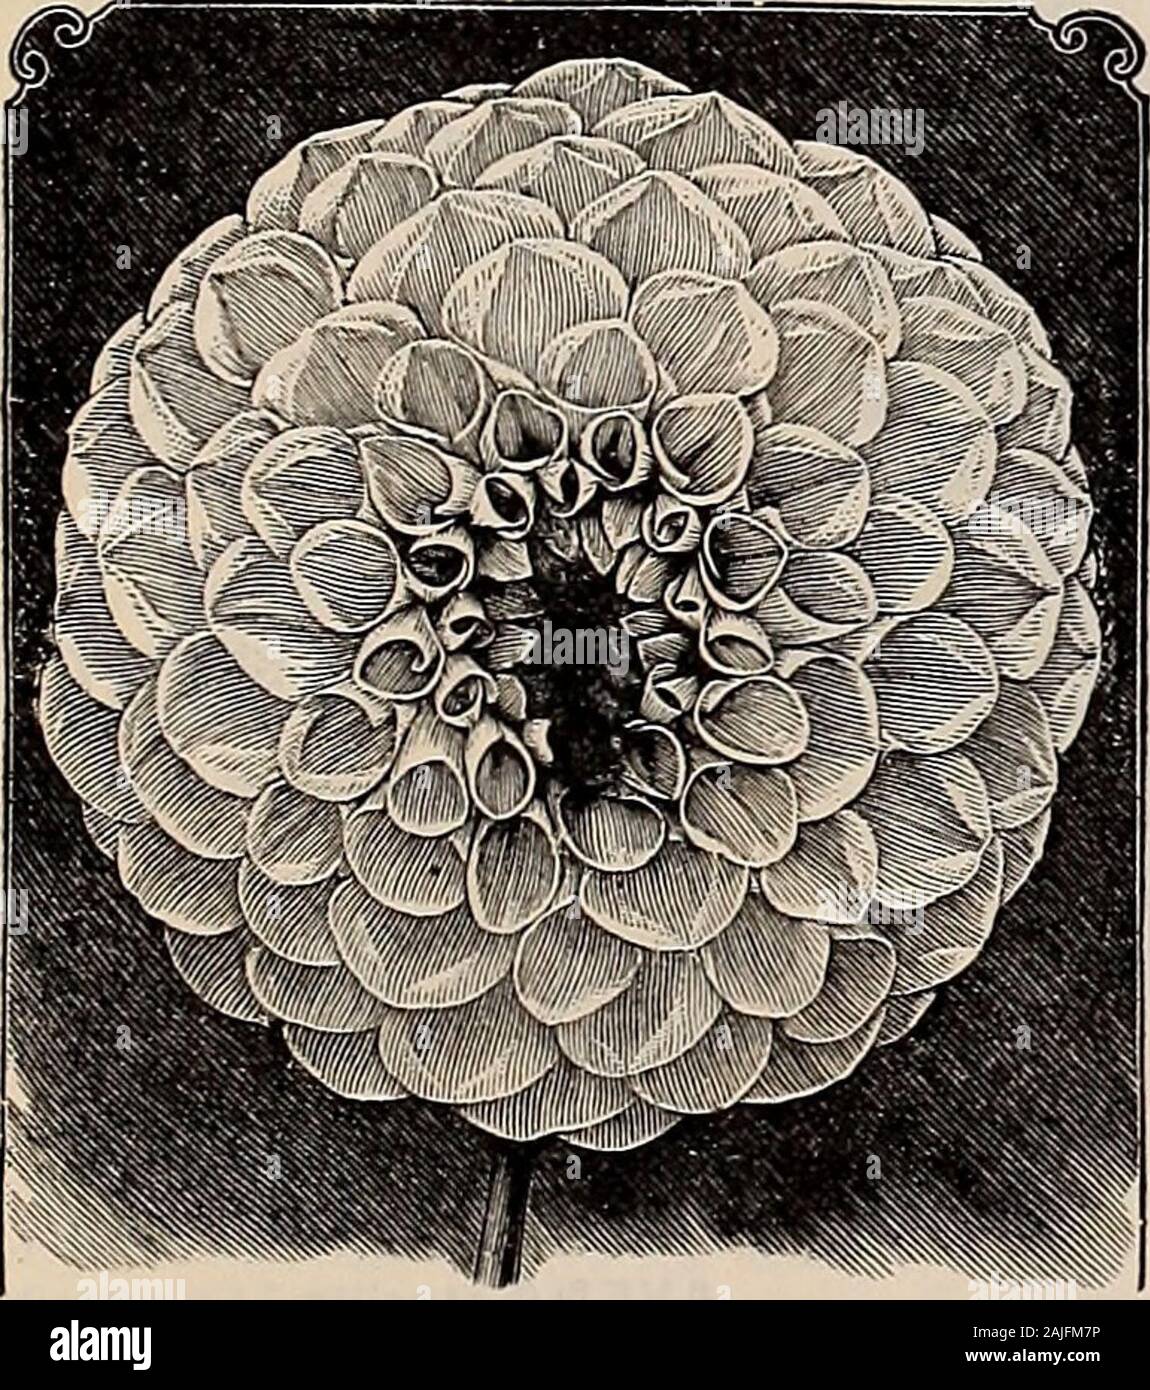 Beckert's garden, field and flower seeds . kings are rich beyond description. Pkt. 10c.Laclntatus (Double Fringed Pink). Large, showy flowers with fringed edges; beauti-fully striped. Pkt. 5 cts.Double Chinese, or Indian. Flowers large, double, in all rich colors. Fine mixed. Pkt. 5 cts., oz. 30 cts.Double White Chinese. Flowers large and showy. Pkt. 5 cts., oz. 35 cts.Hsddewigll grandiflora fl. pi. (Double Japanese Pink). Flowers of immense size andvery double, produced in greatest profusion. Mixed. Pkt. 10c.Eastern Queen. Beautiful rose variety. The flowers are 2 to 6 inches across, splendid Stock Photo